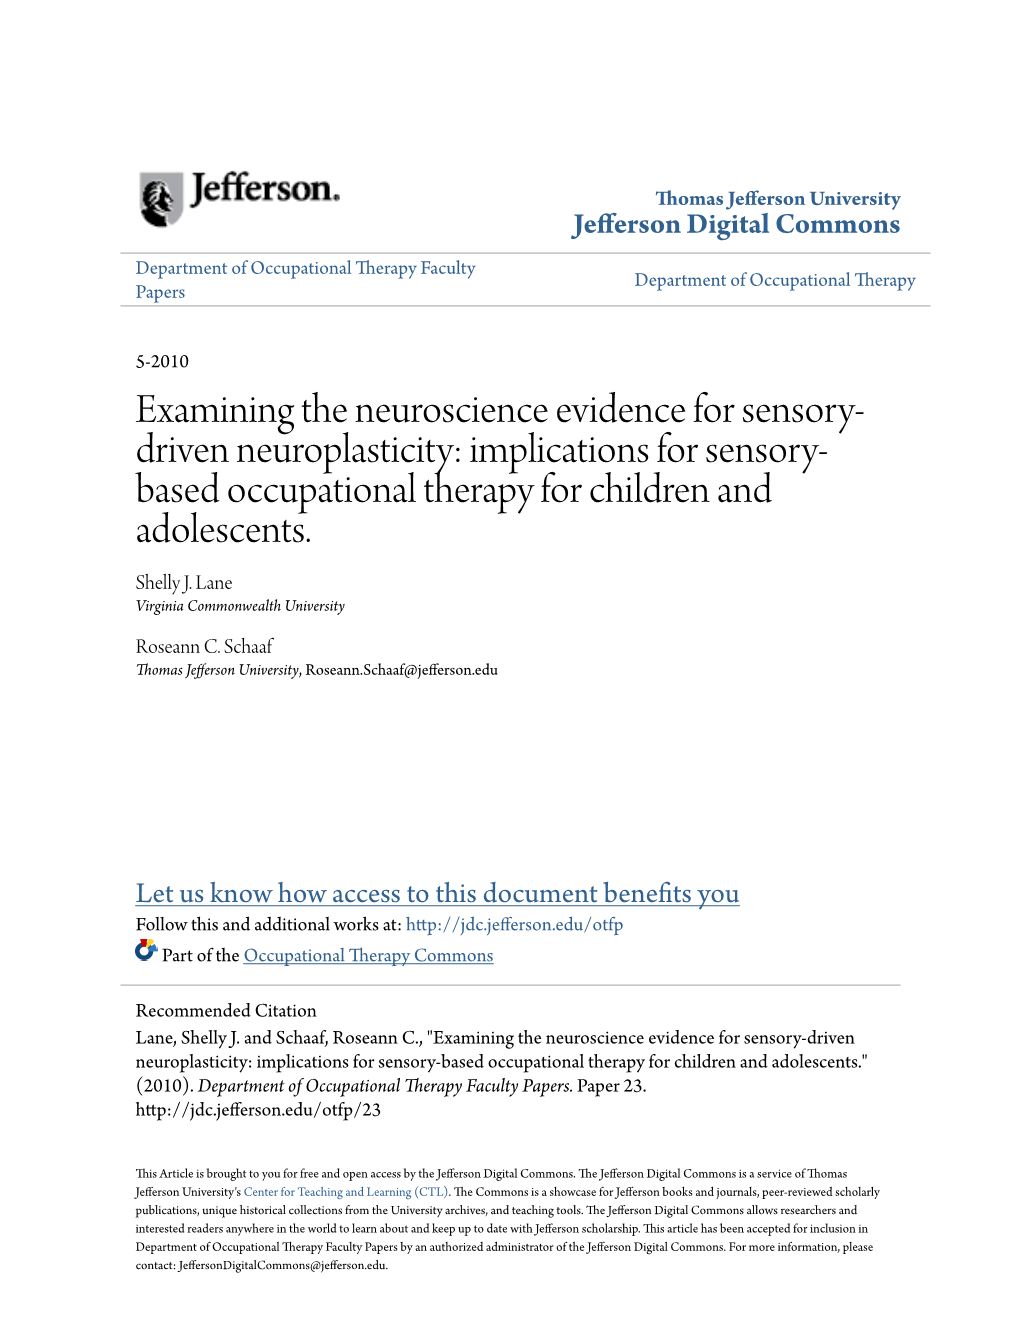 Examining the Neuroscience Evidence for Sensory-Driven Neuroplasticity: Implications for Sensory-Based Occupational Therapy for Children and Adolescents." (2010)